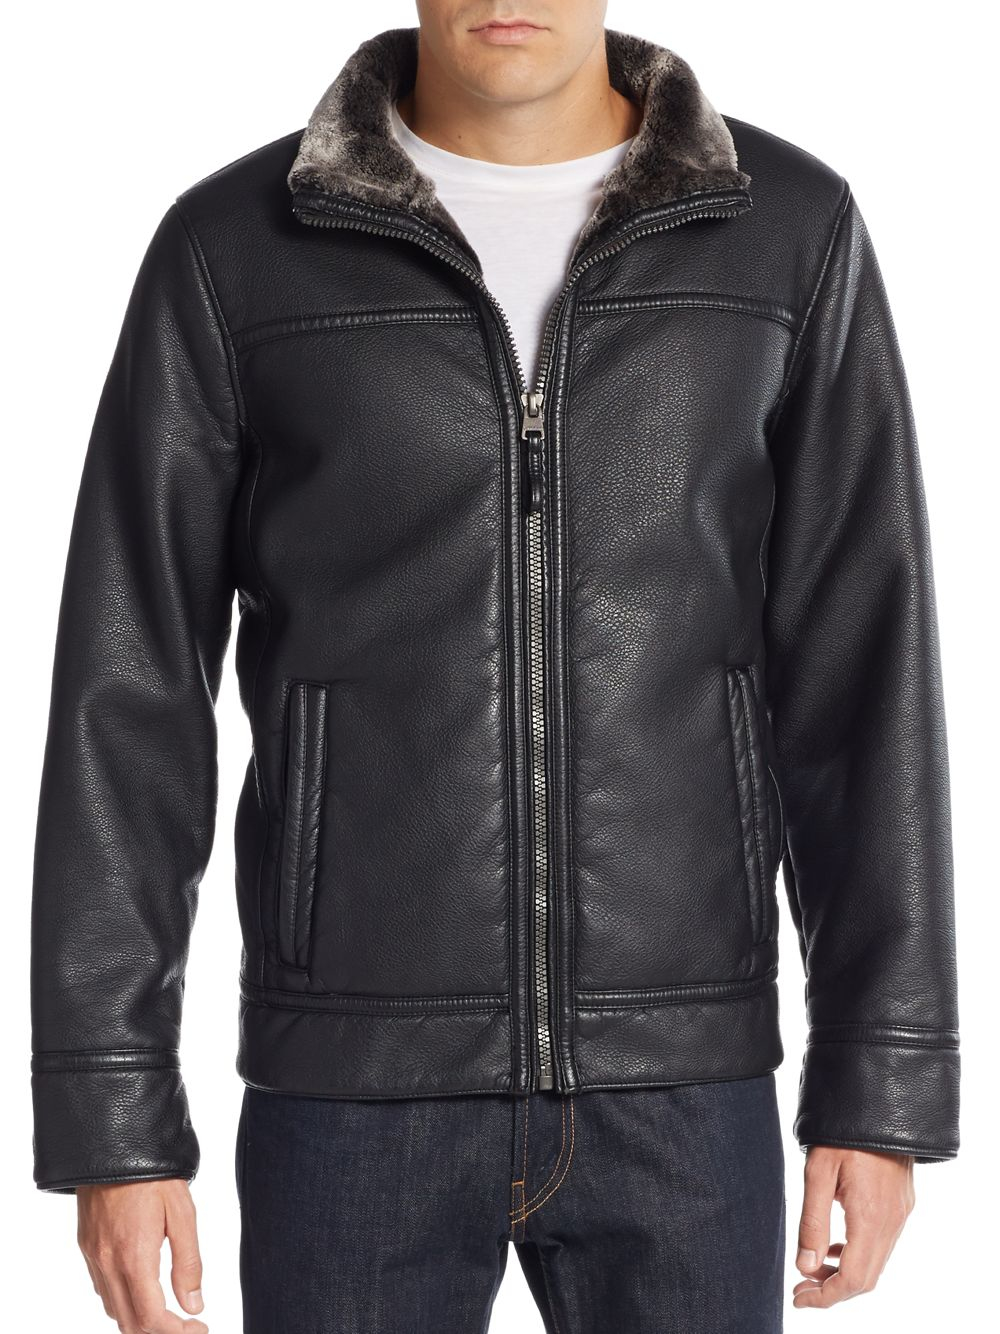 Lyst - Calvin Klein Pebbled Faux Leather Jacket in Black for Men